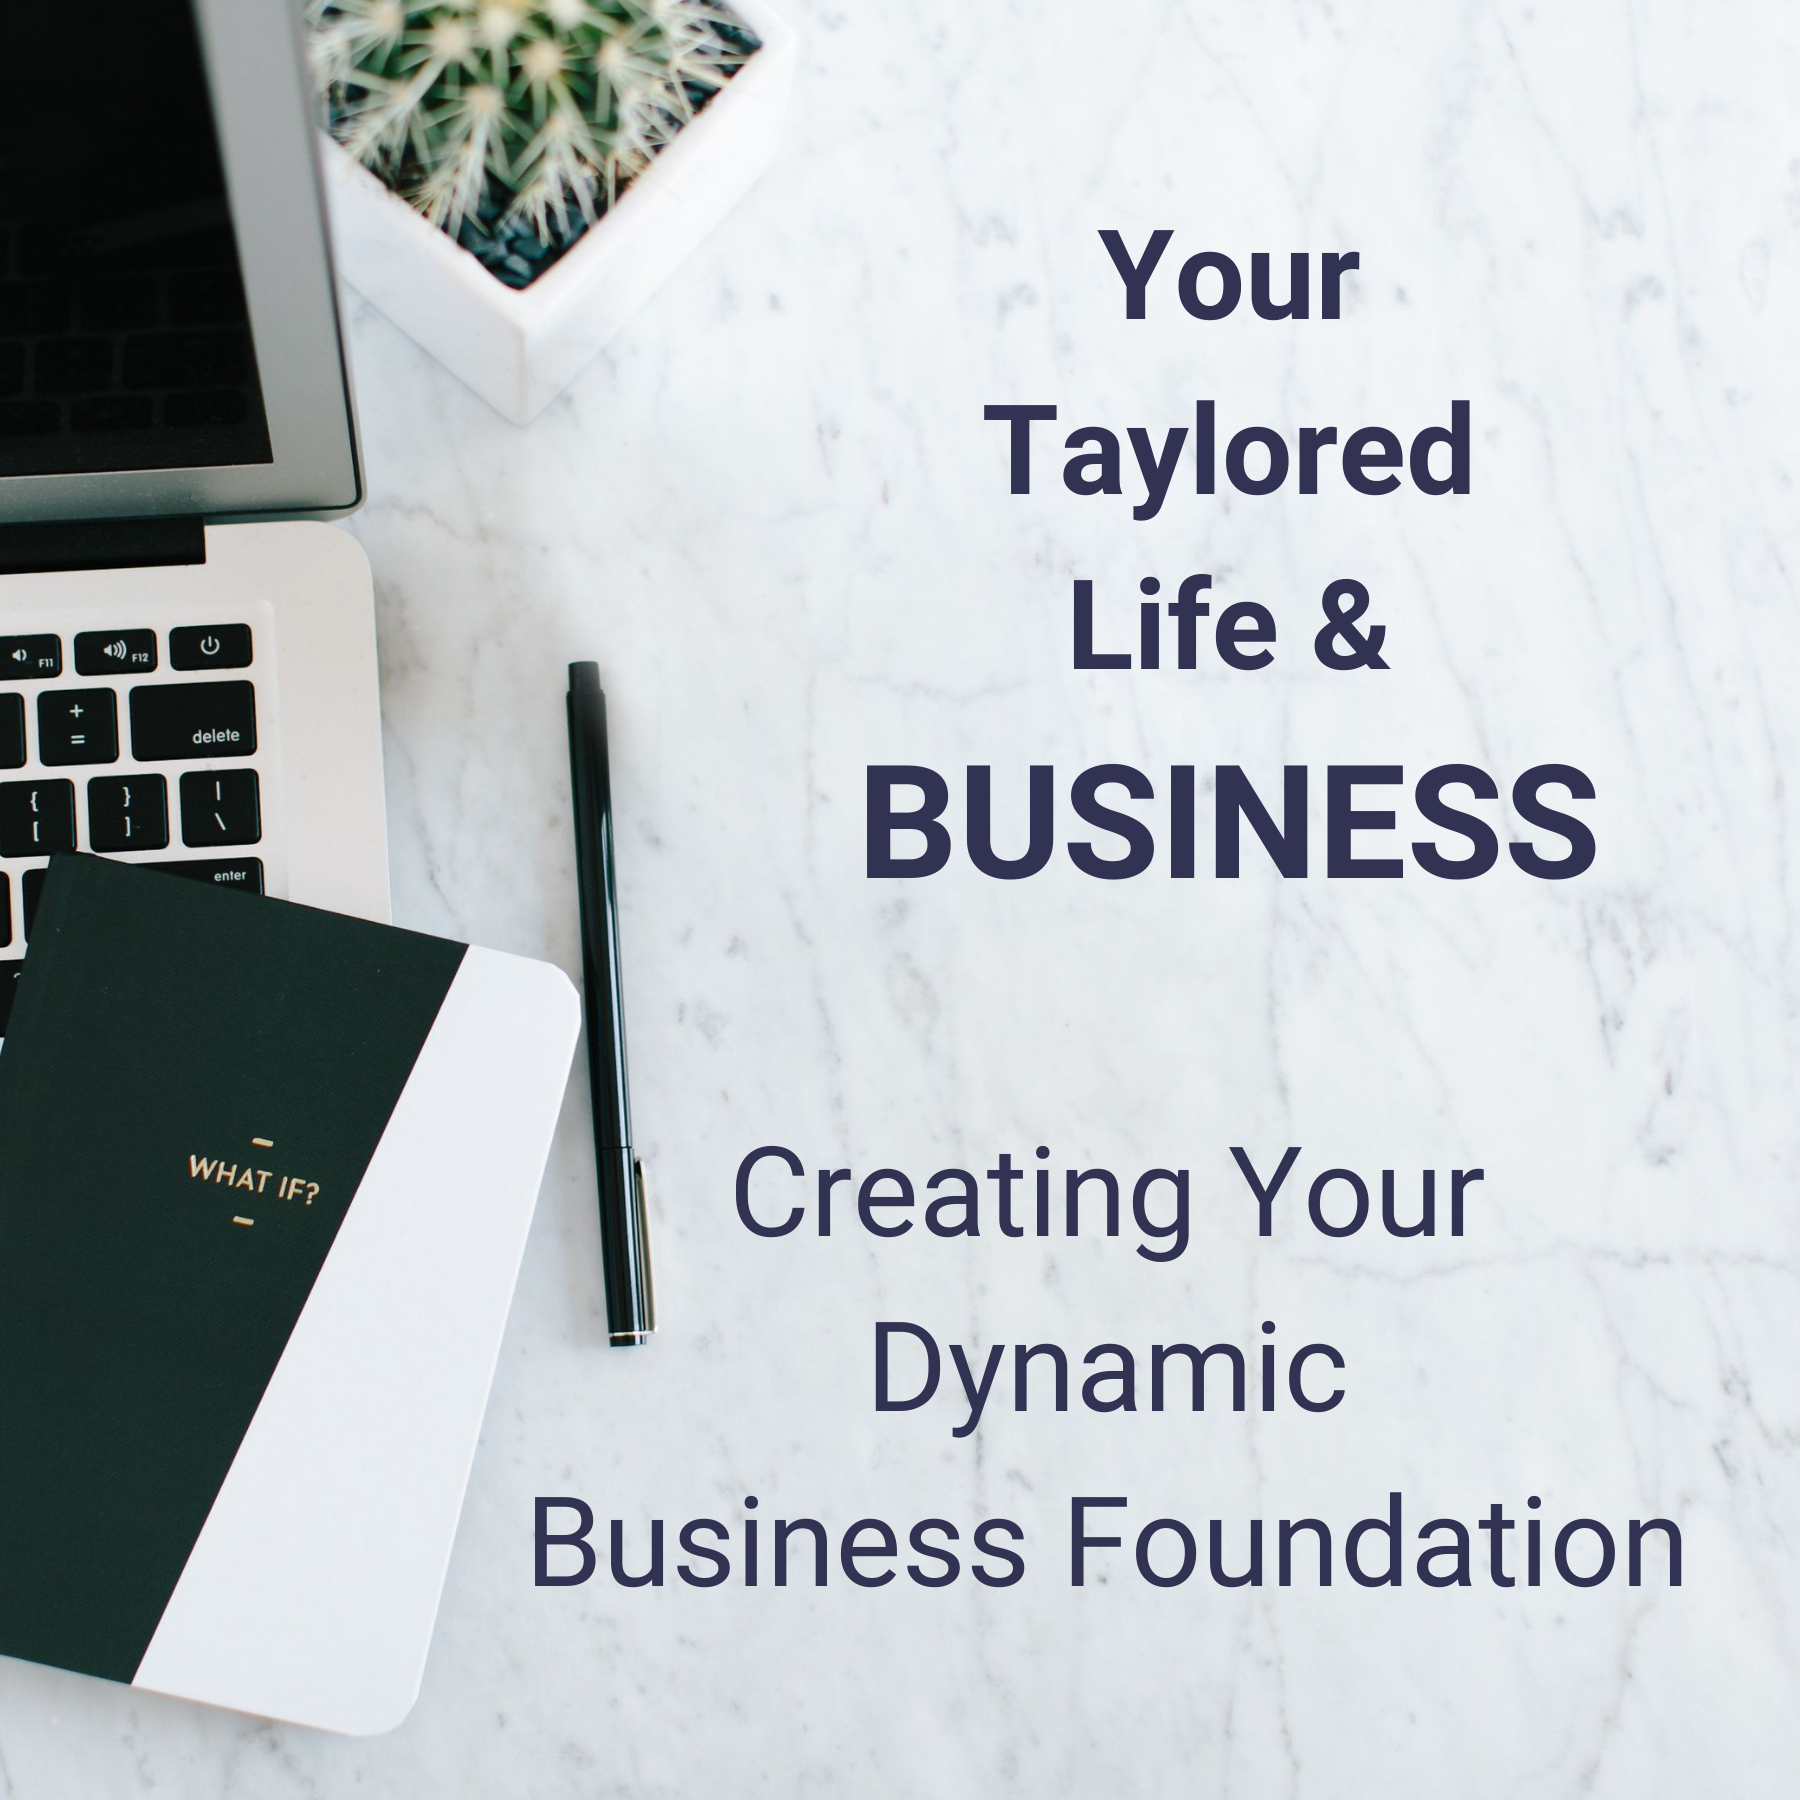 Your Taylored Life & Business: Creating your dynamic business foundation.